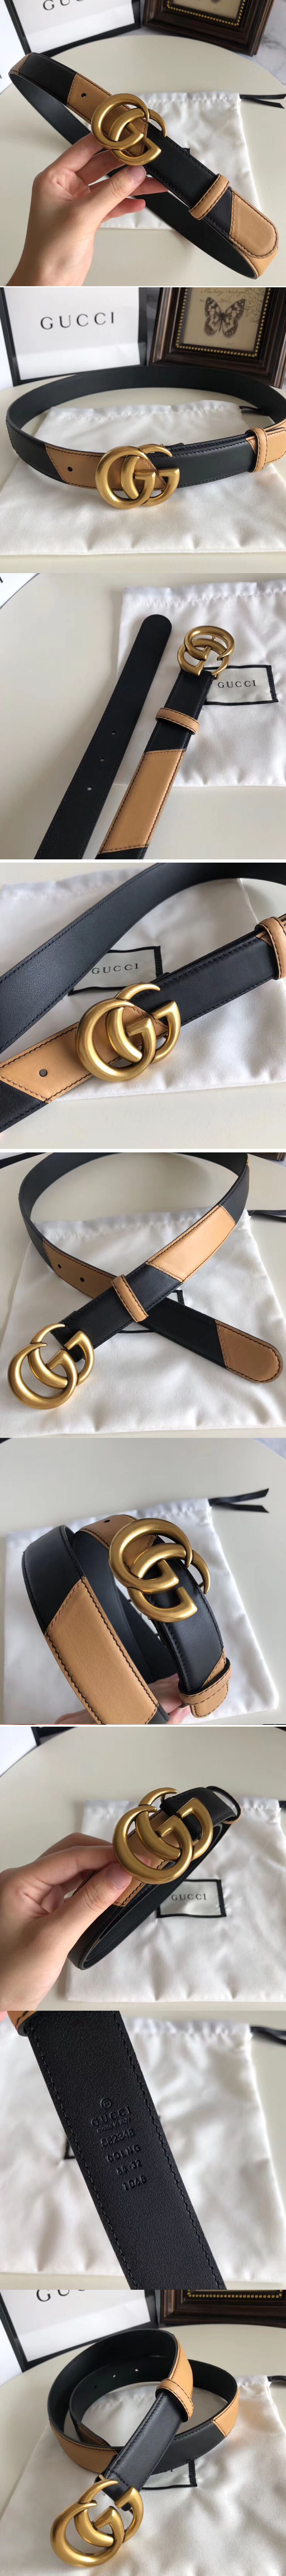 Replica Gucci 582348 30cm Leather belt with Double G buckle Black and Tan Leather